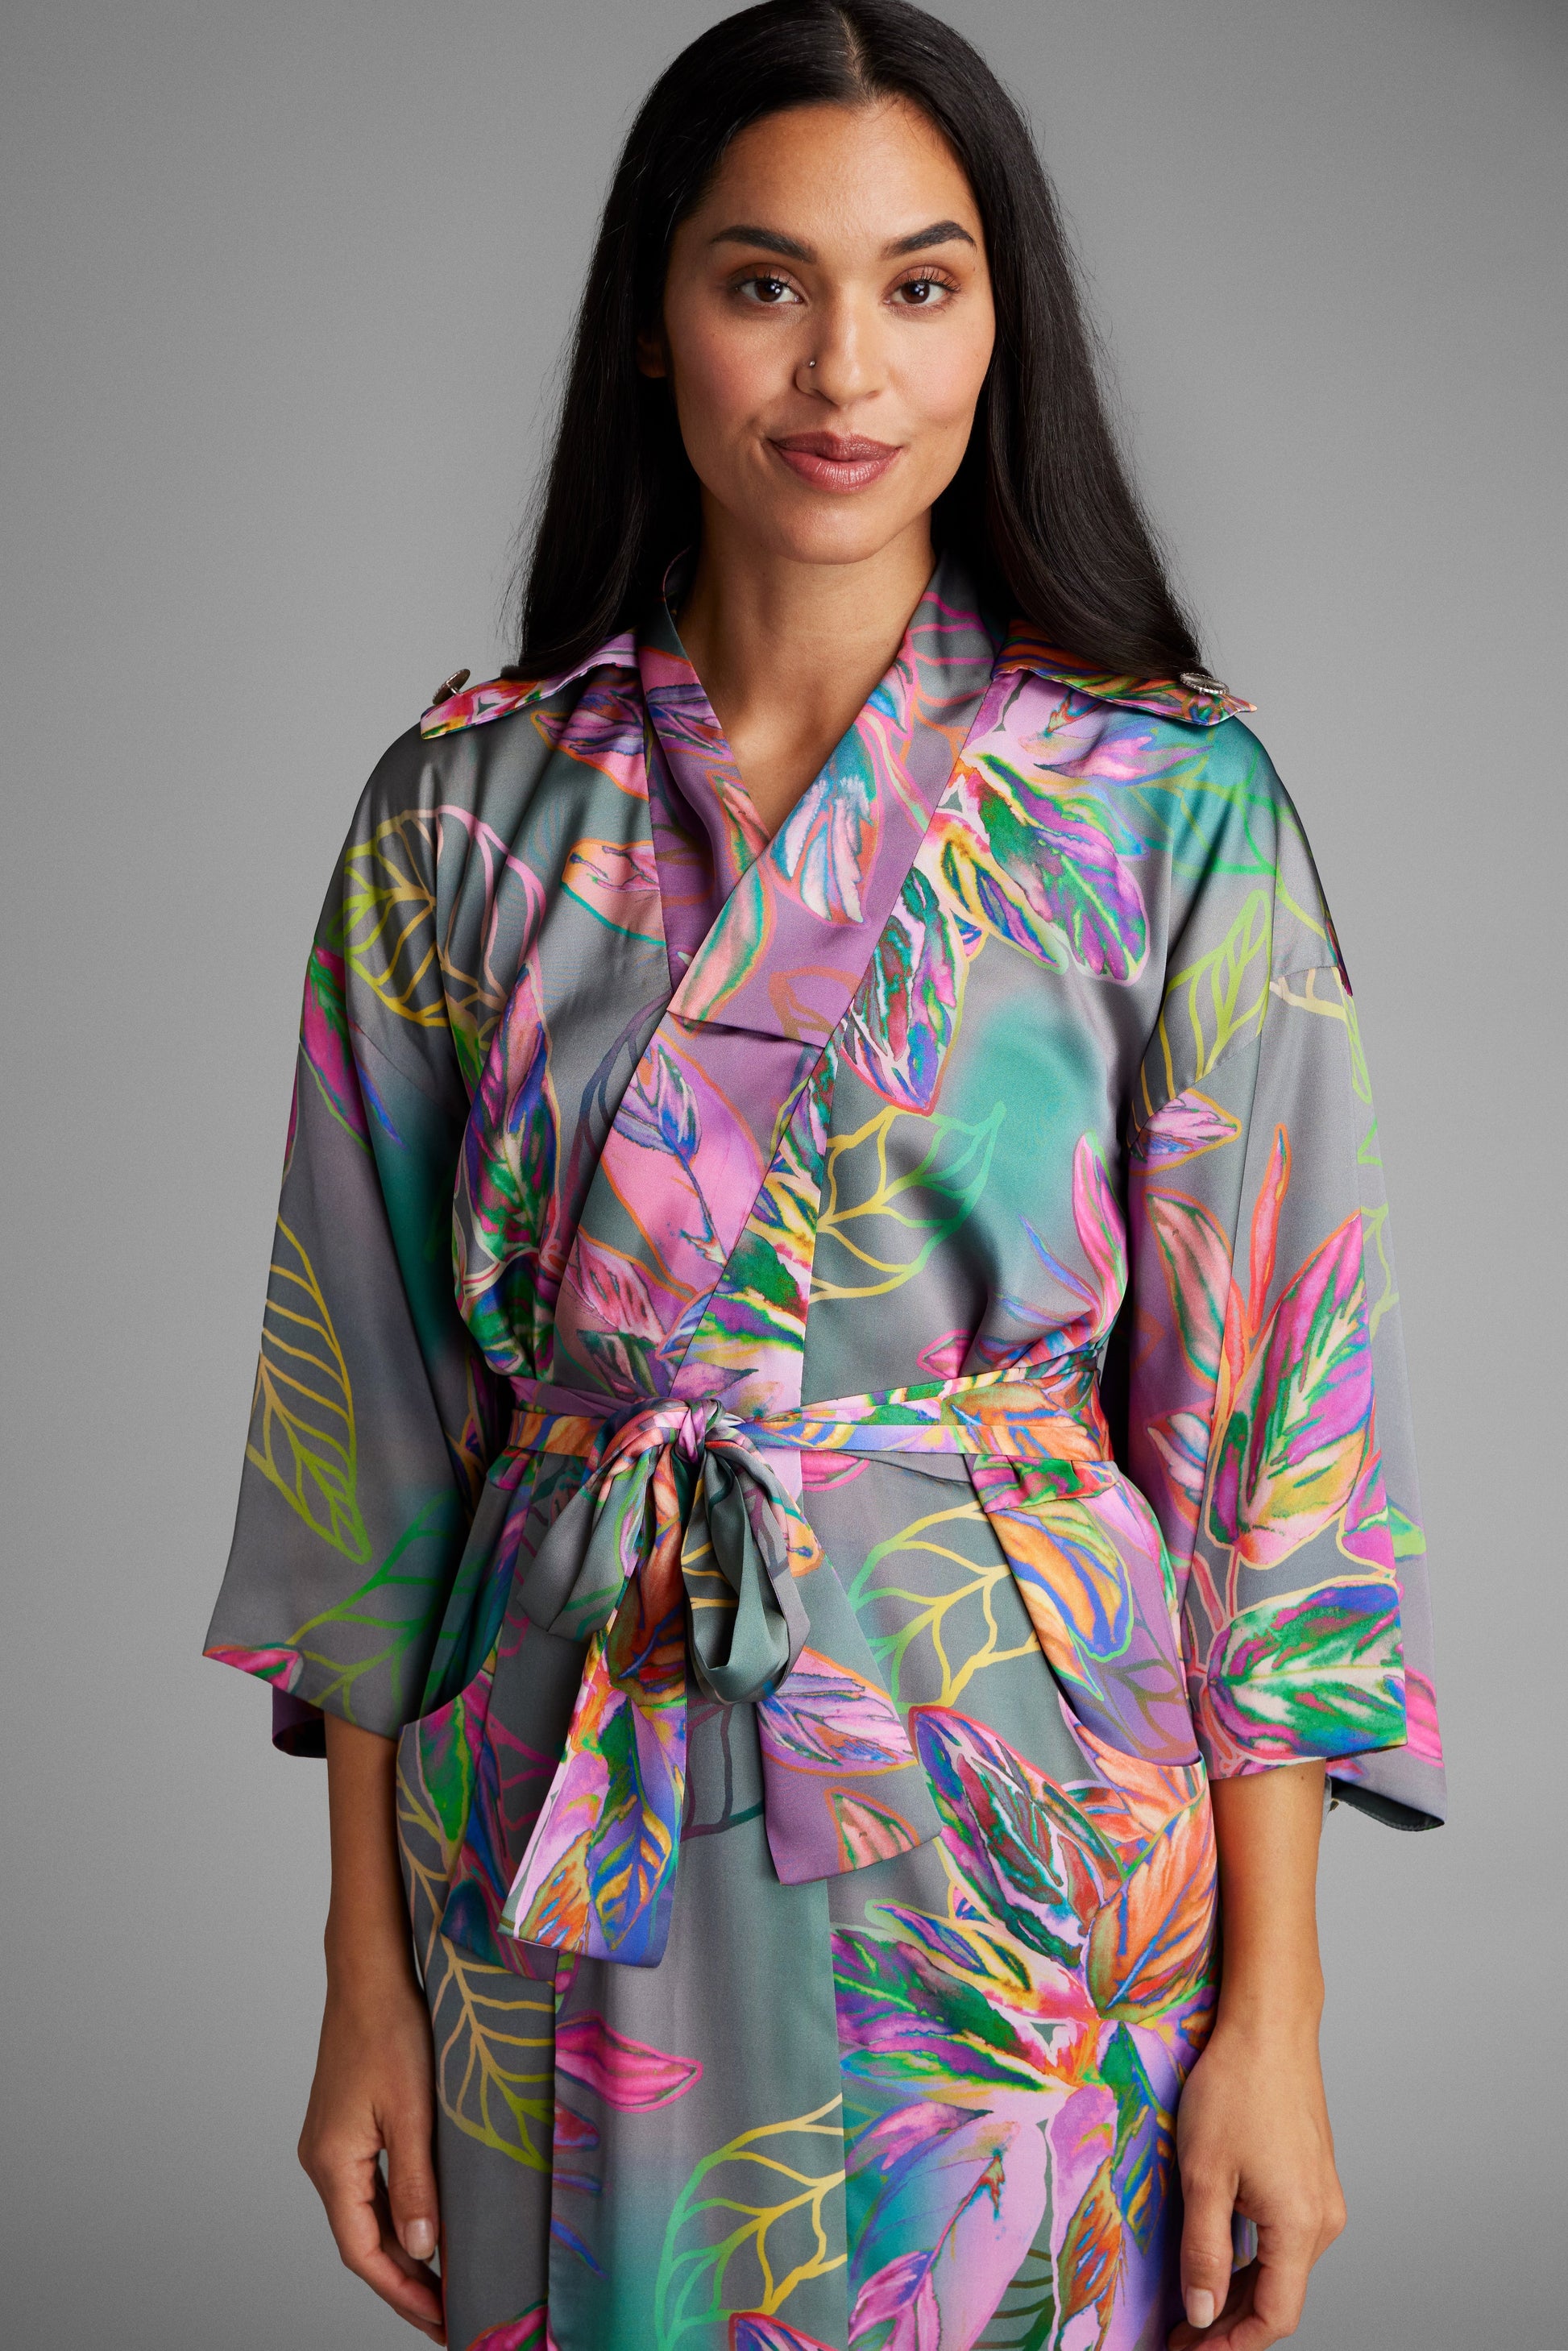 Woman standing with hands at her side wearing an all over tropical printed kimono duster made from recycled materials